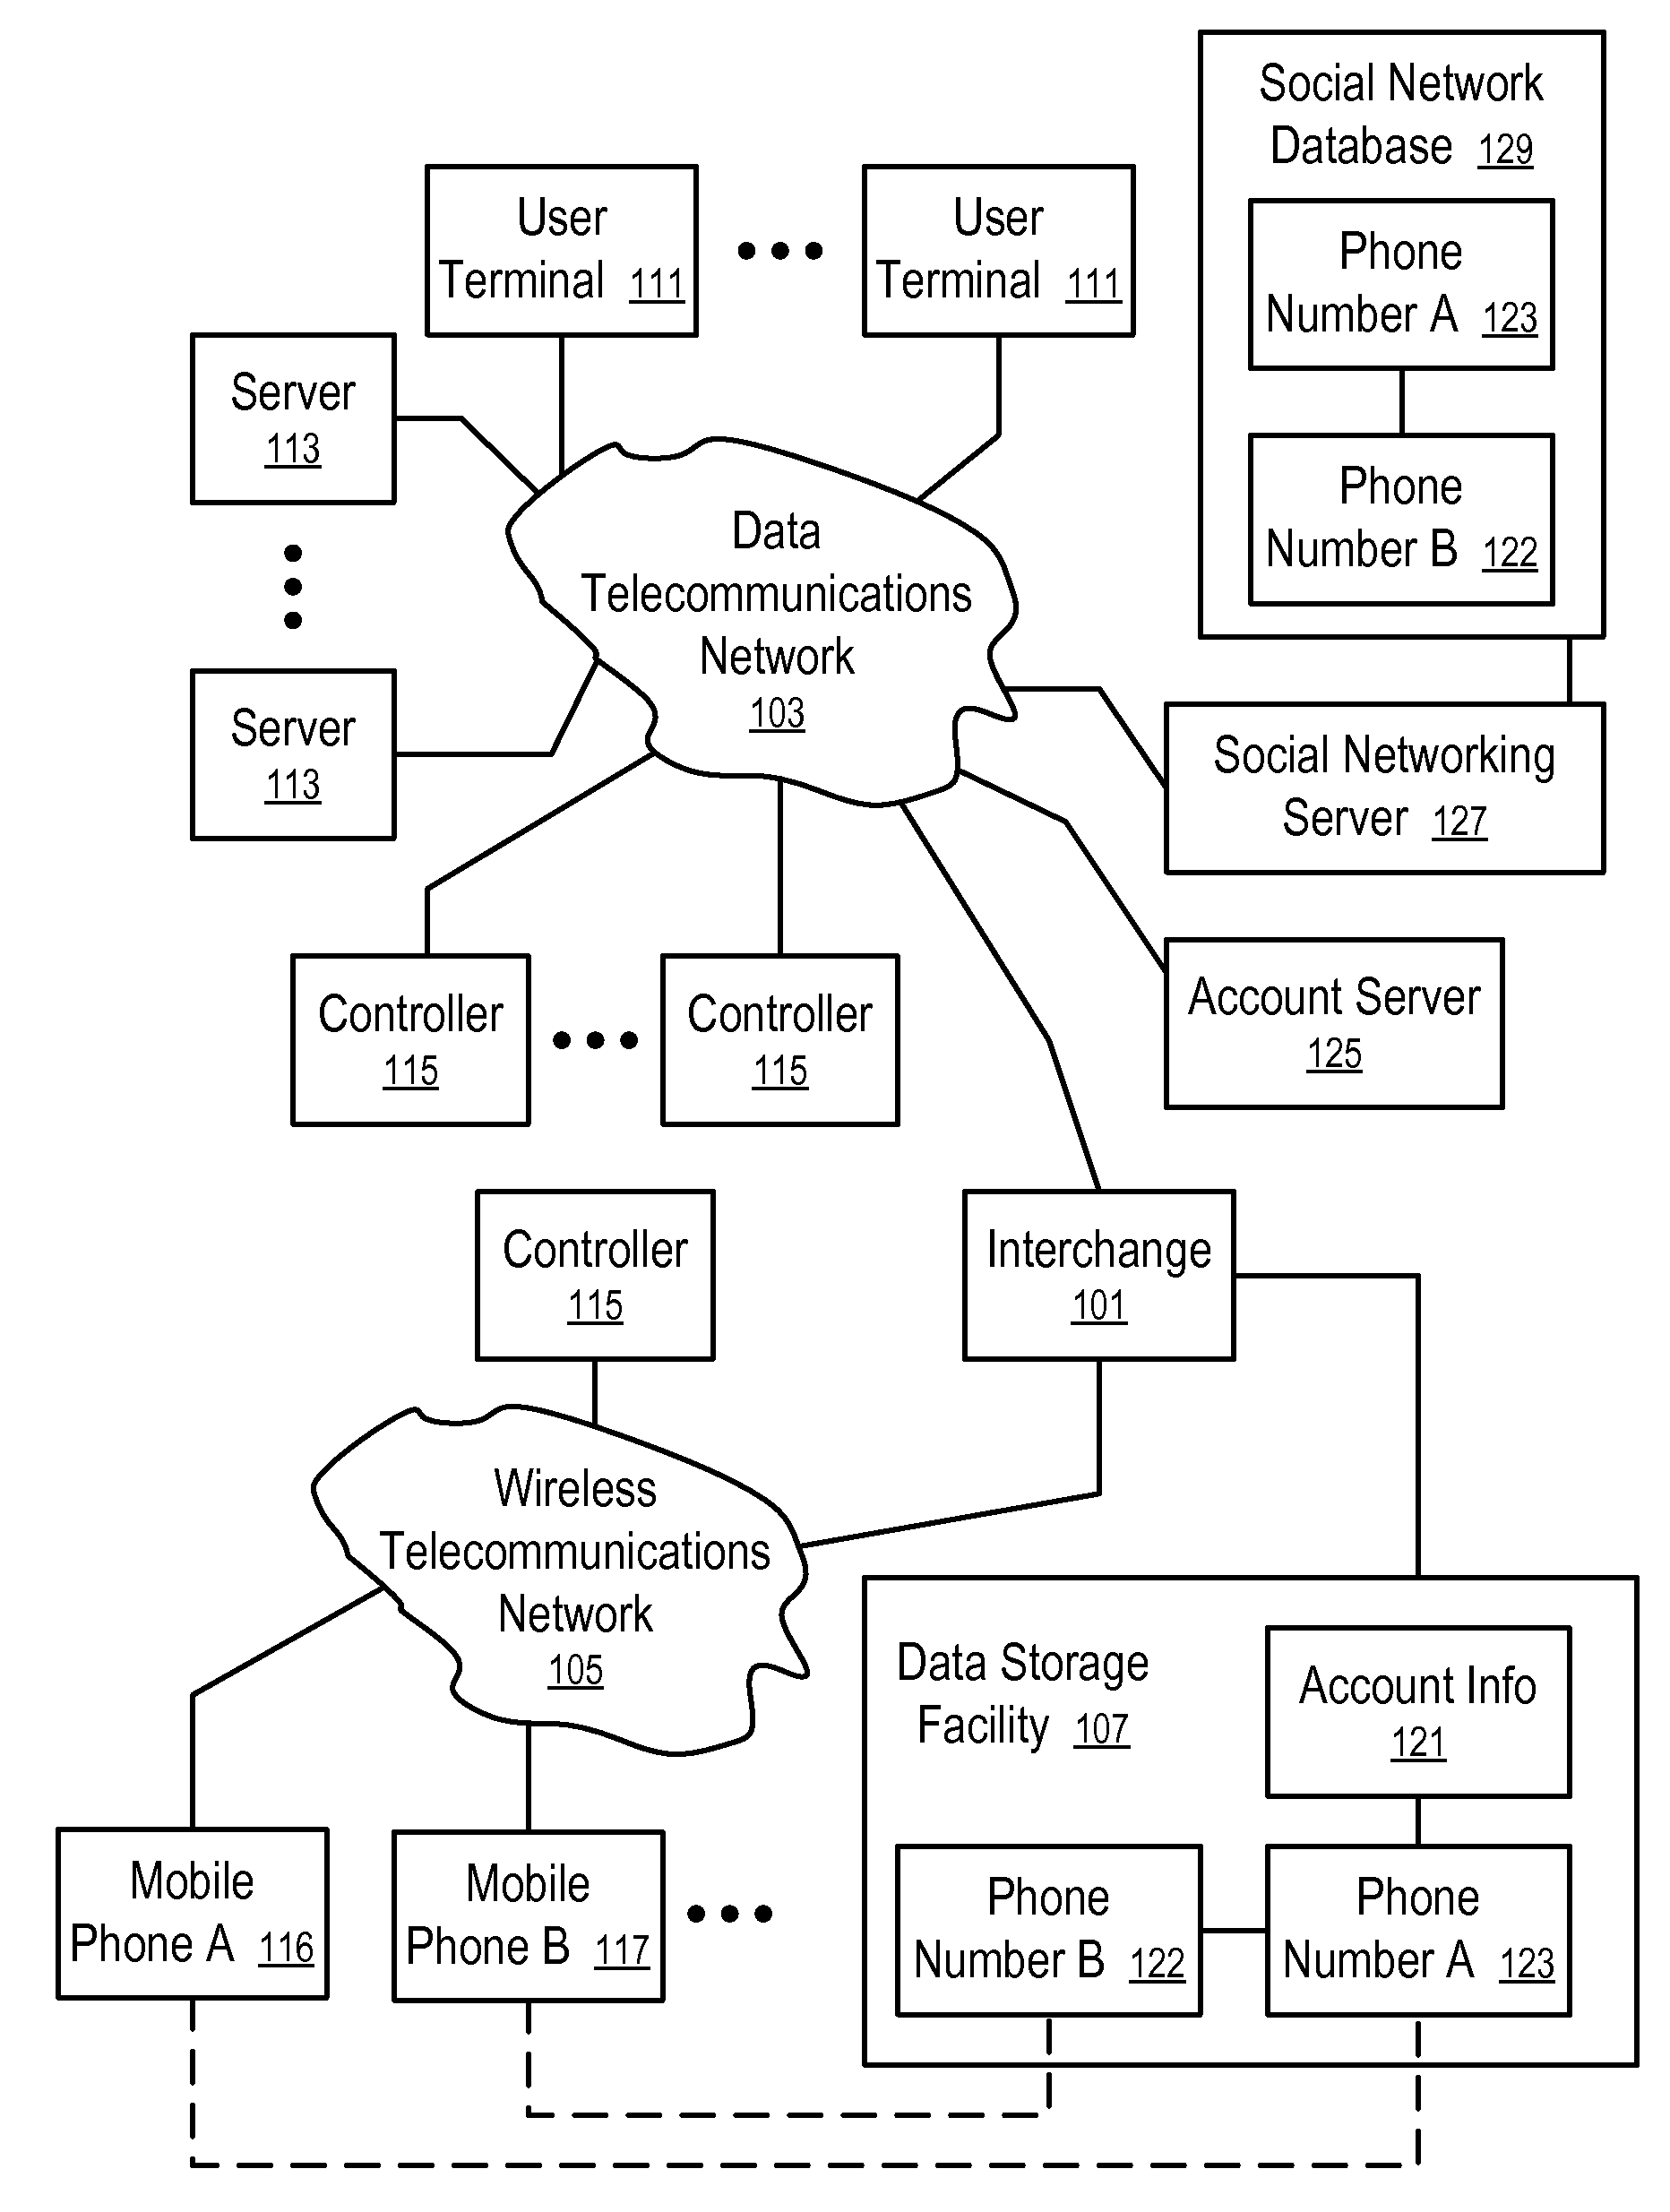 Systems and Methods to Process Transactions Based on Social Networking